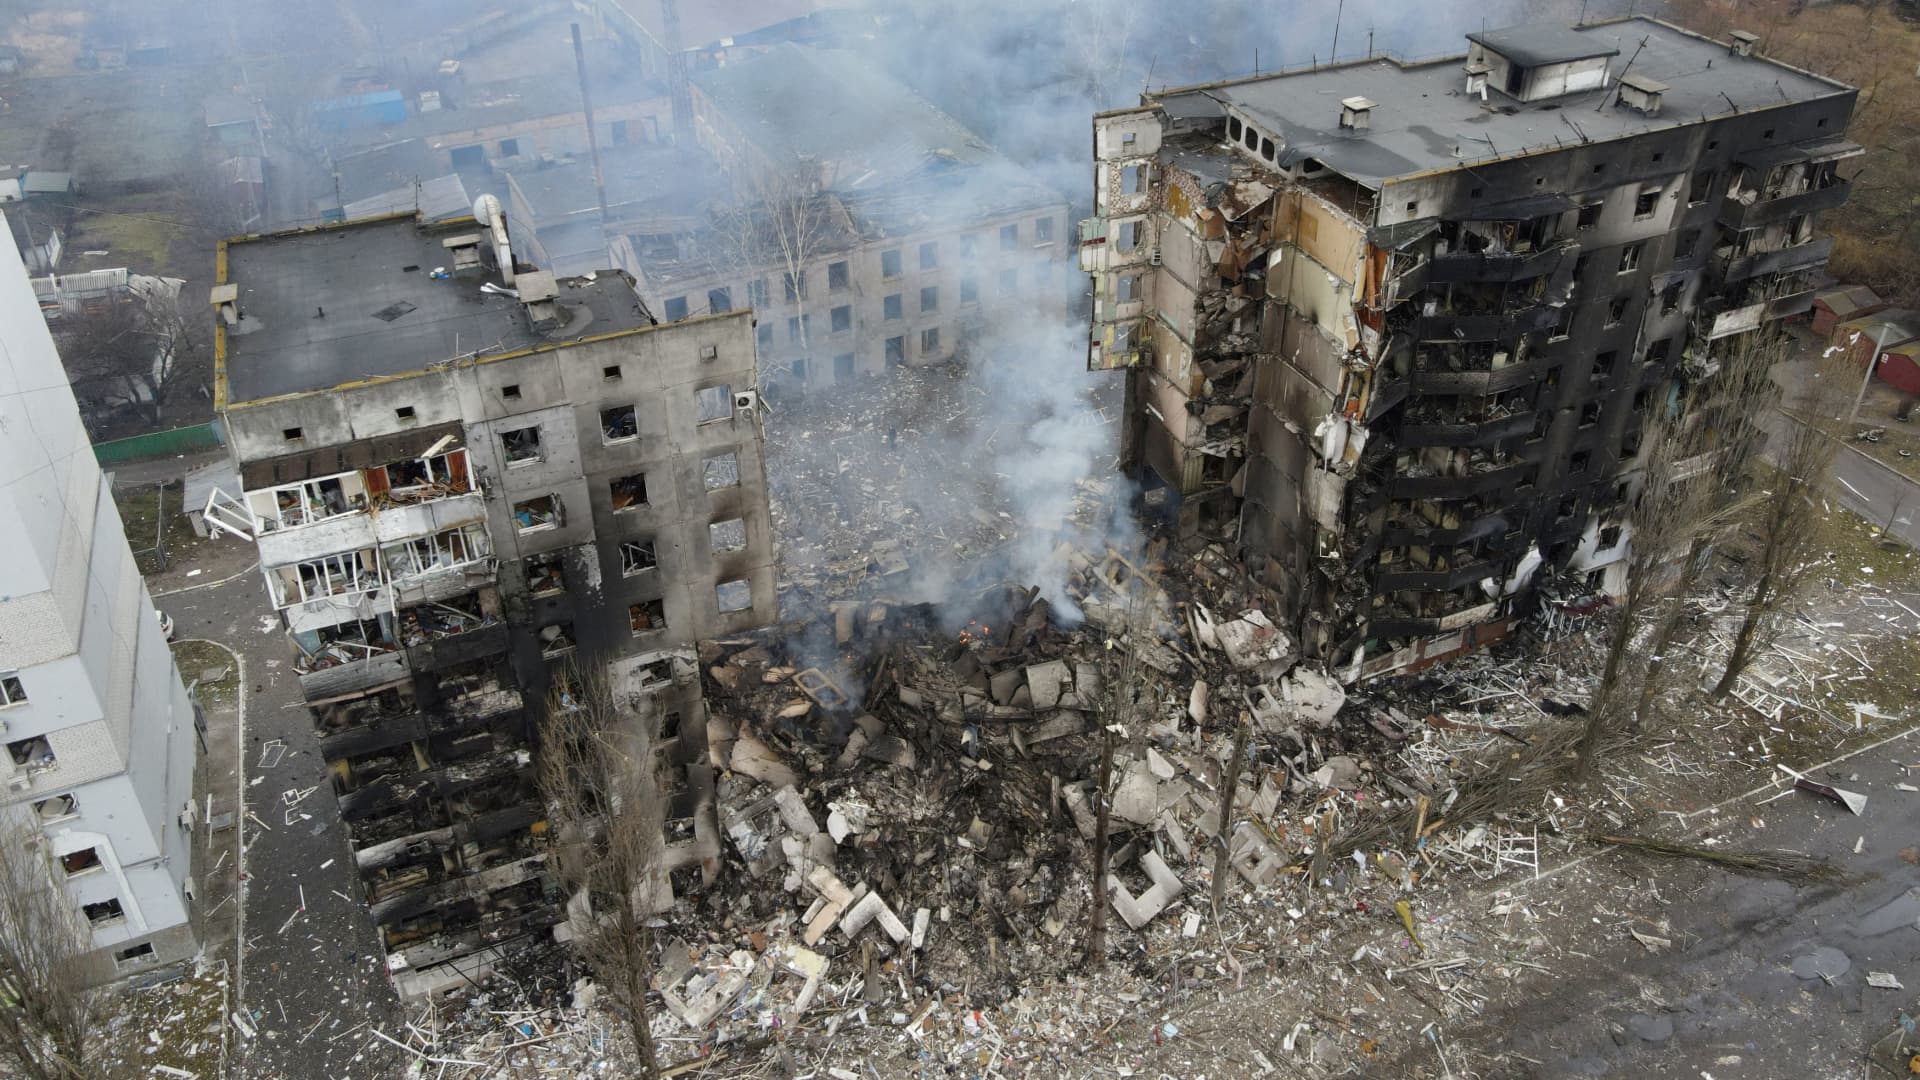 An aerial view shows a residential building destroyed by shelling, as Russia's invasion of Ukraine continues, in the settlement of Borodyanka in the Kyiv region, Ukraine March 3, 2022.